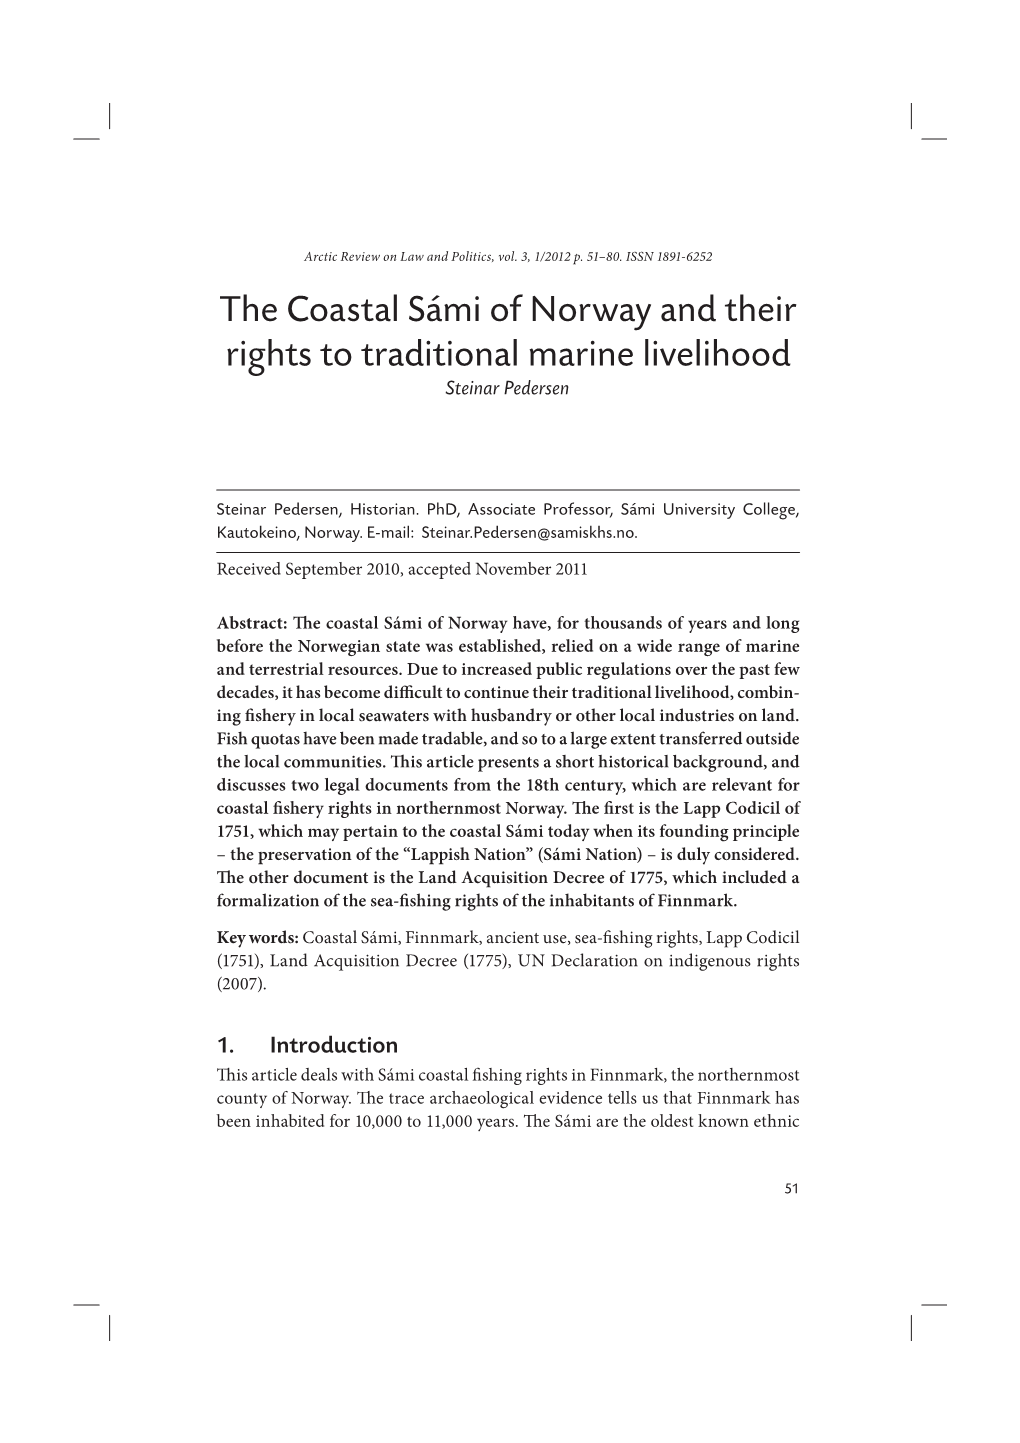 The Coastal Sámi of Norway and Their Rights to Traditional Marine Livelihood Steinar Pedersen